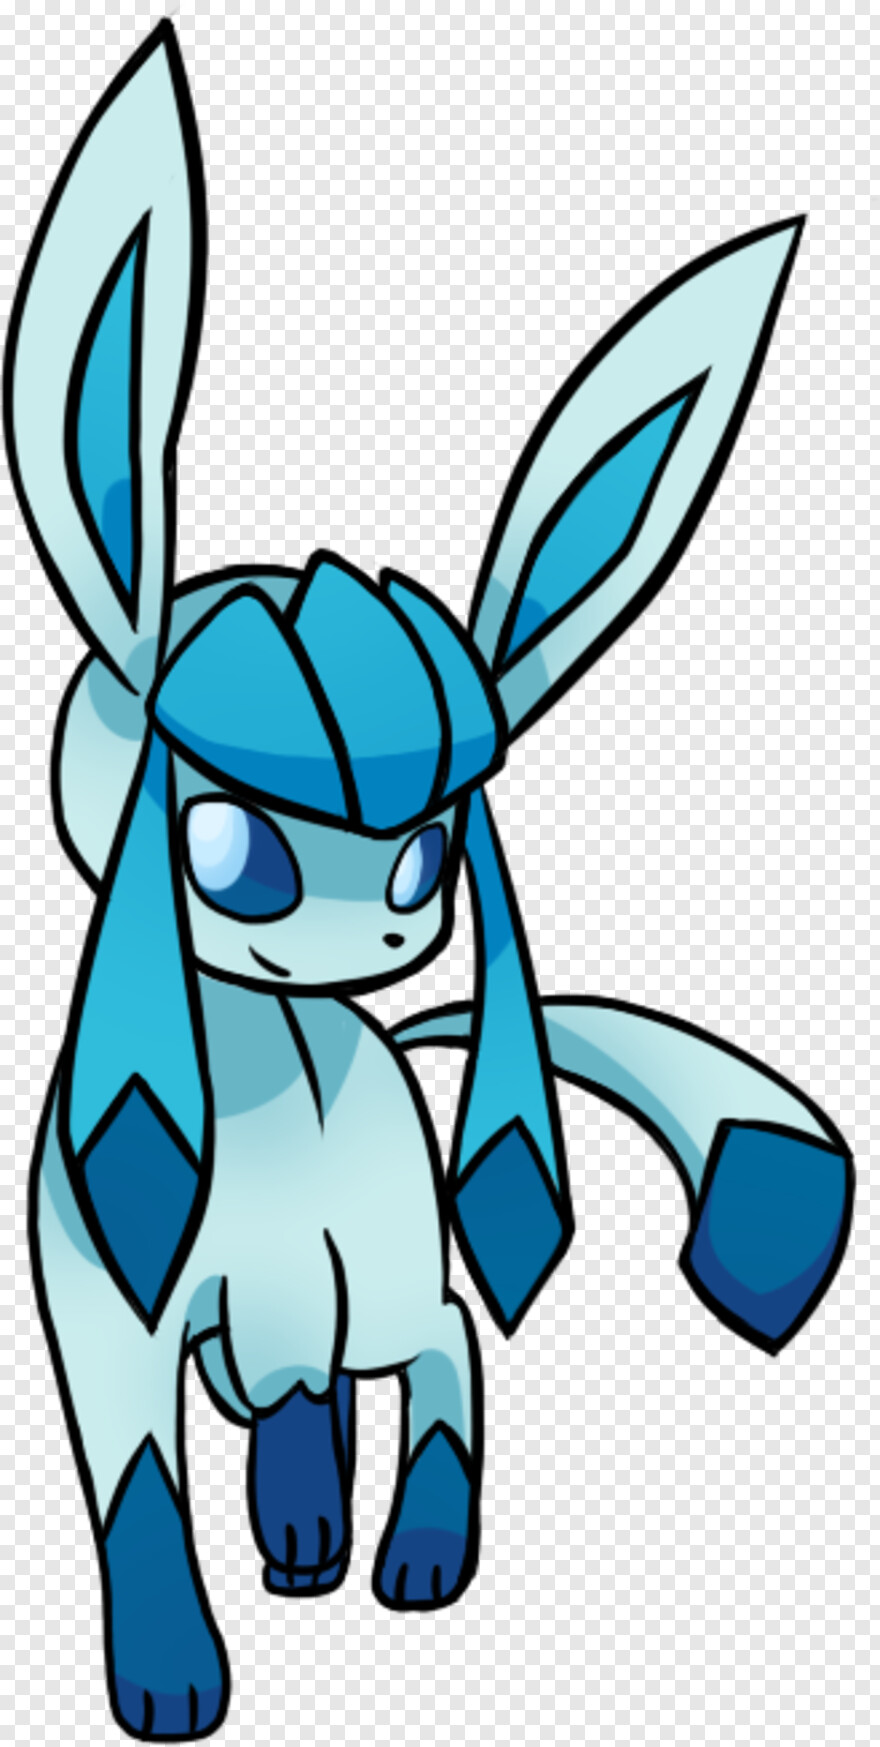 glaceon # 957657